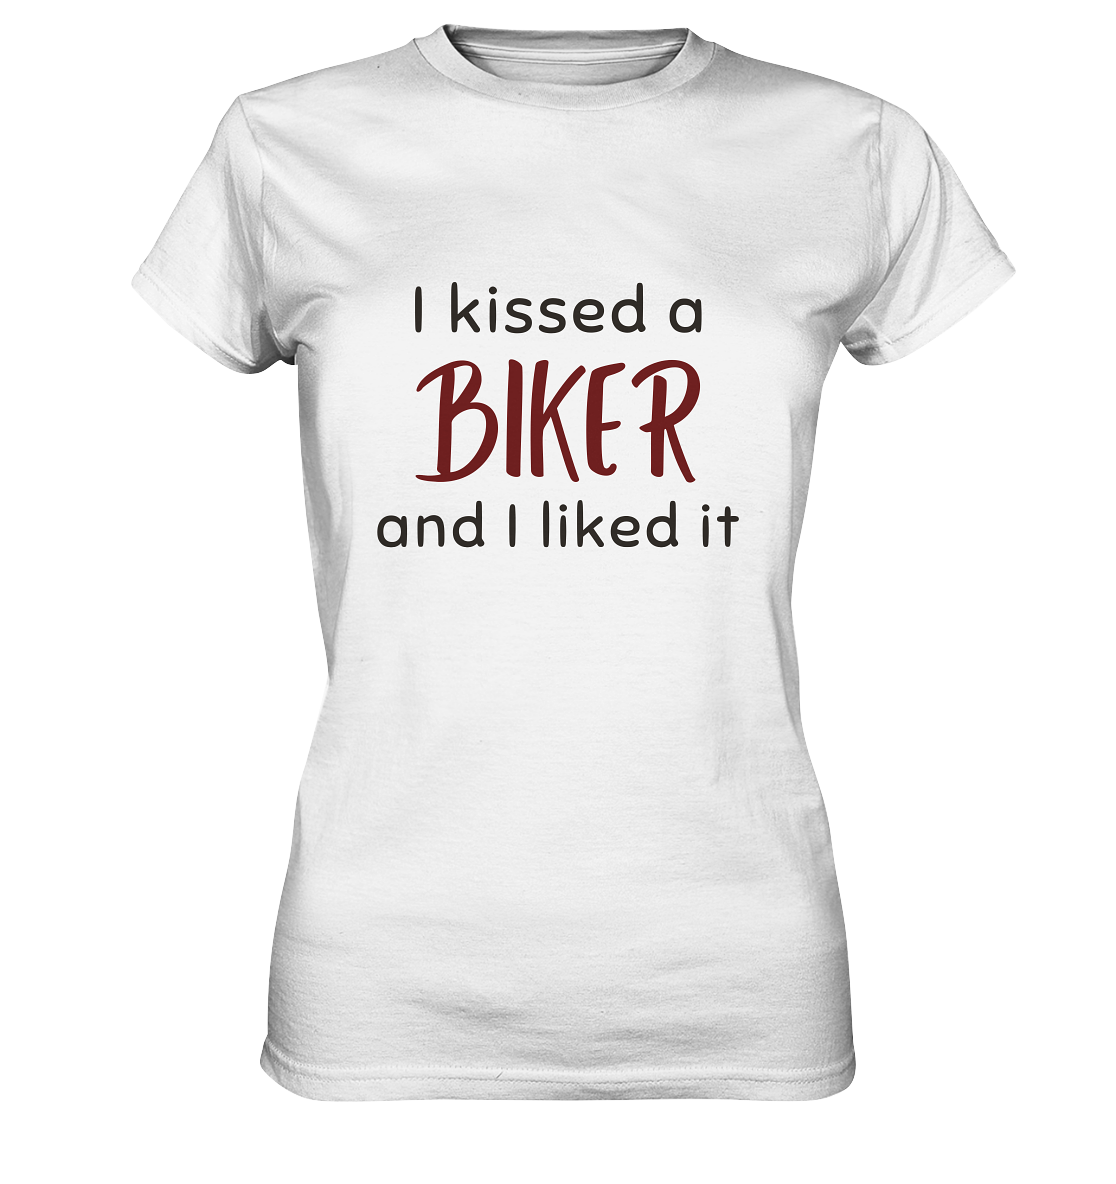 T-Shirt, Damen, ladies, spruch, quote, "I kissed a biker and I liked it", love, liebe, weiß, white